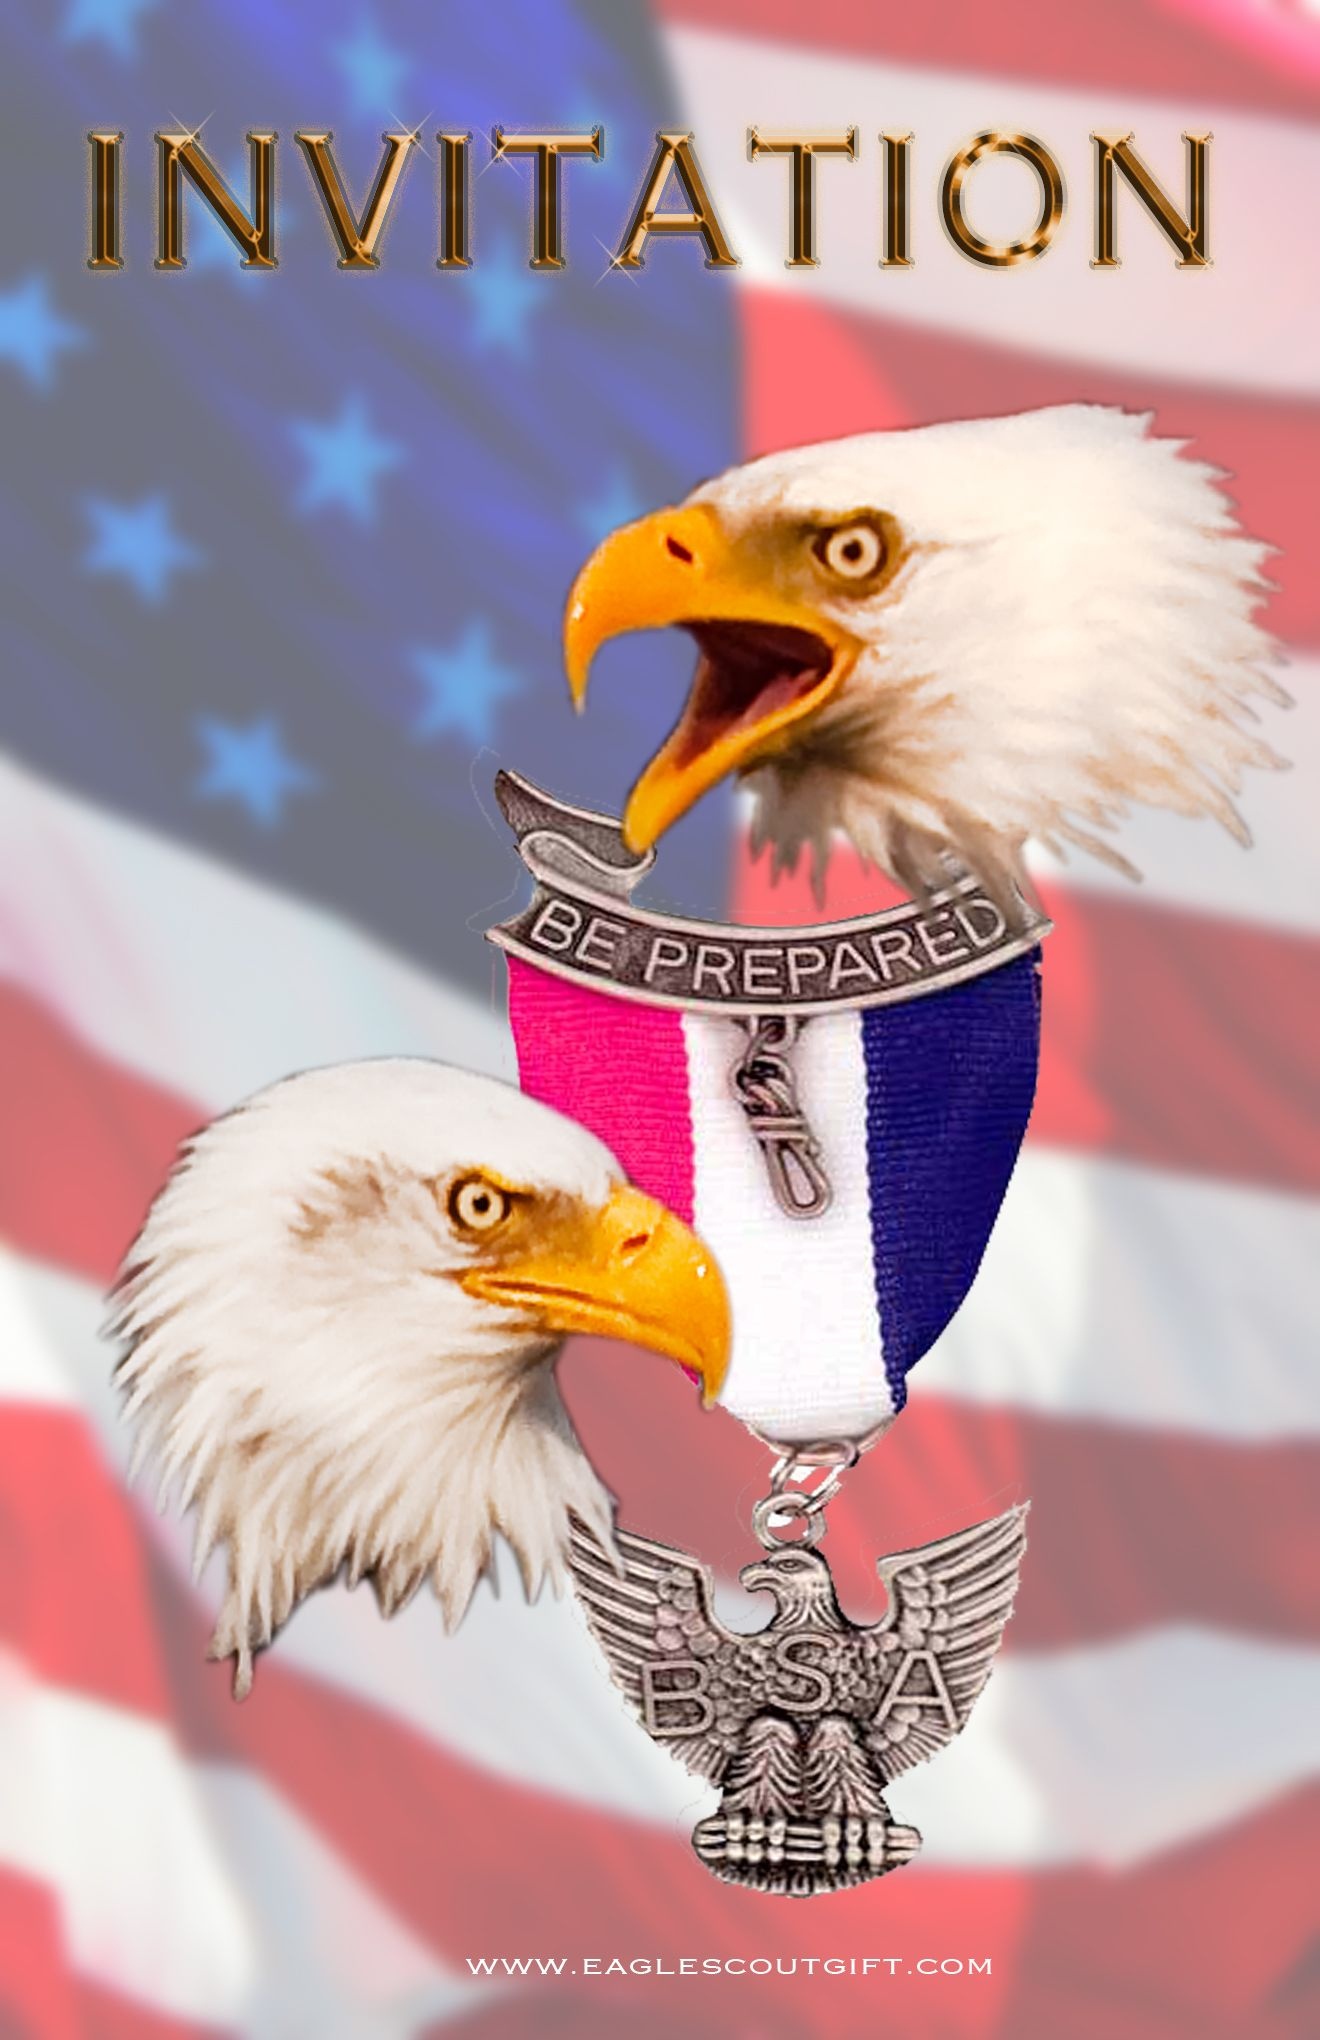 Eagle Scout Gift - Free Downloads, Invitation, Program And - Eagle Scout Cards Free Printable